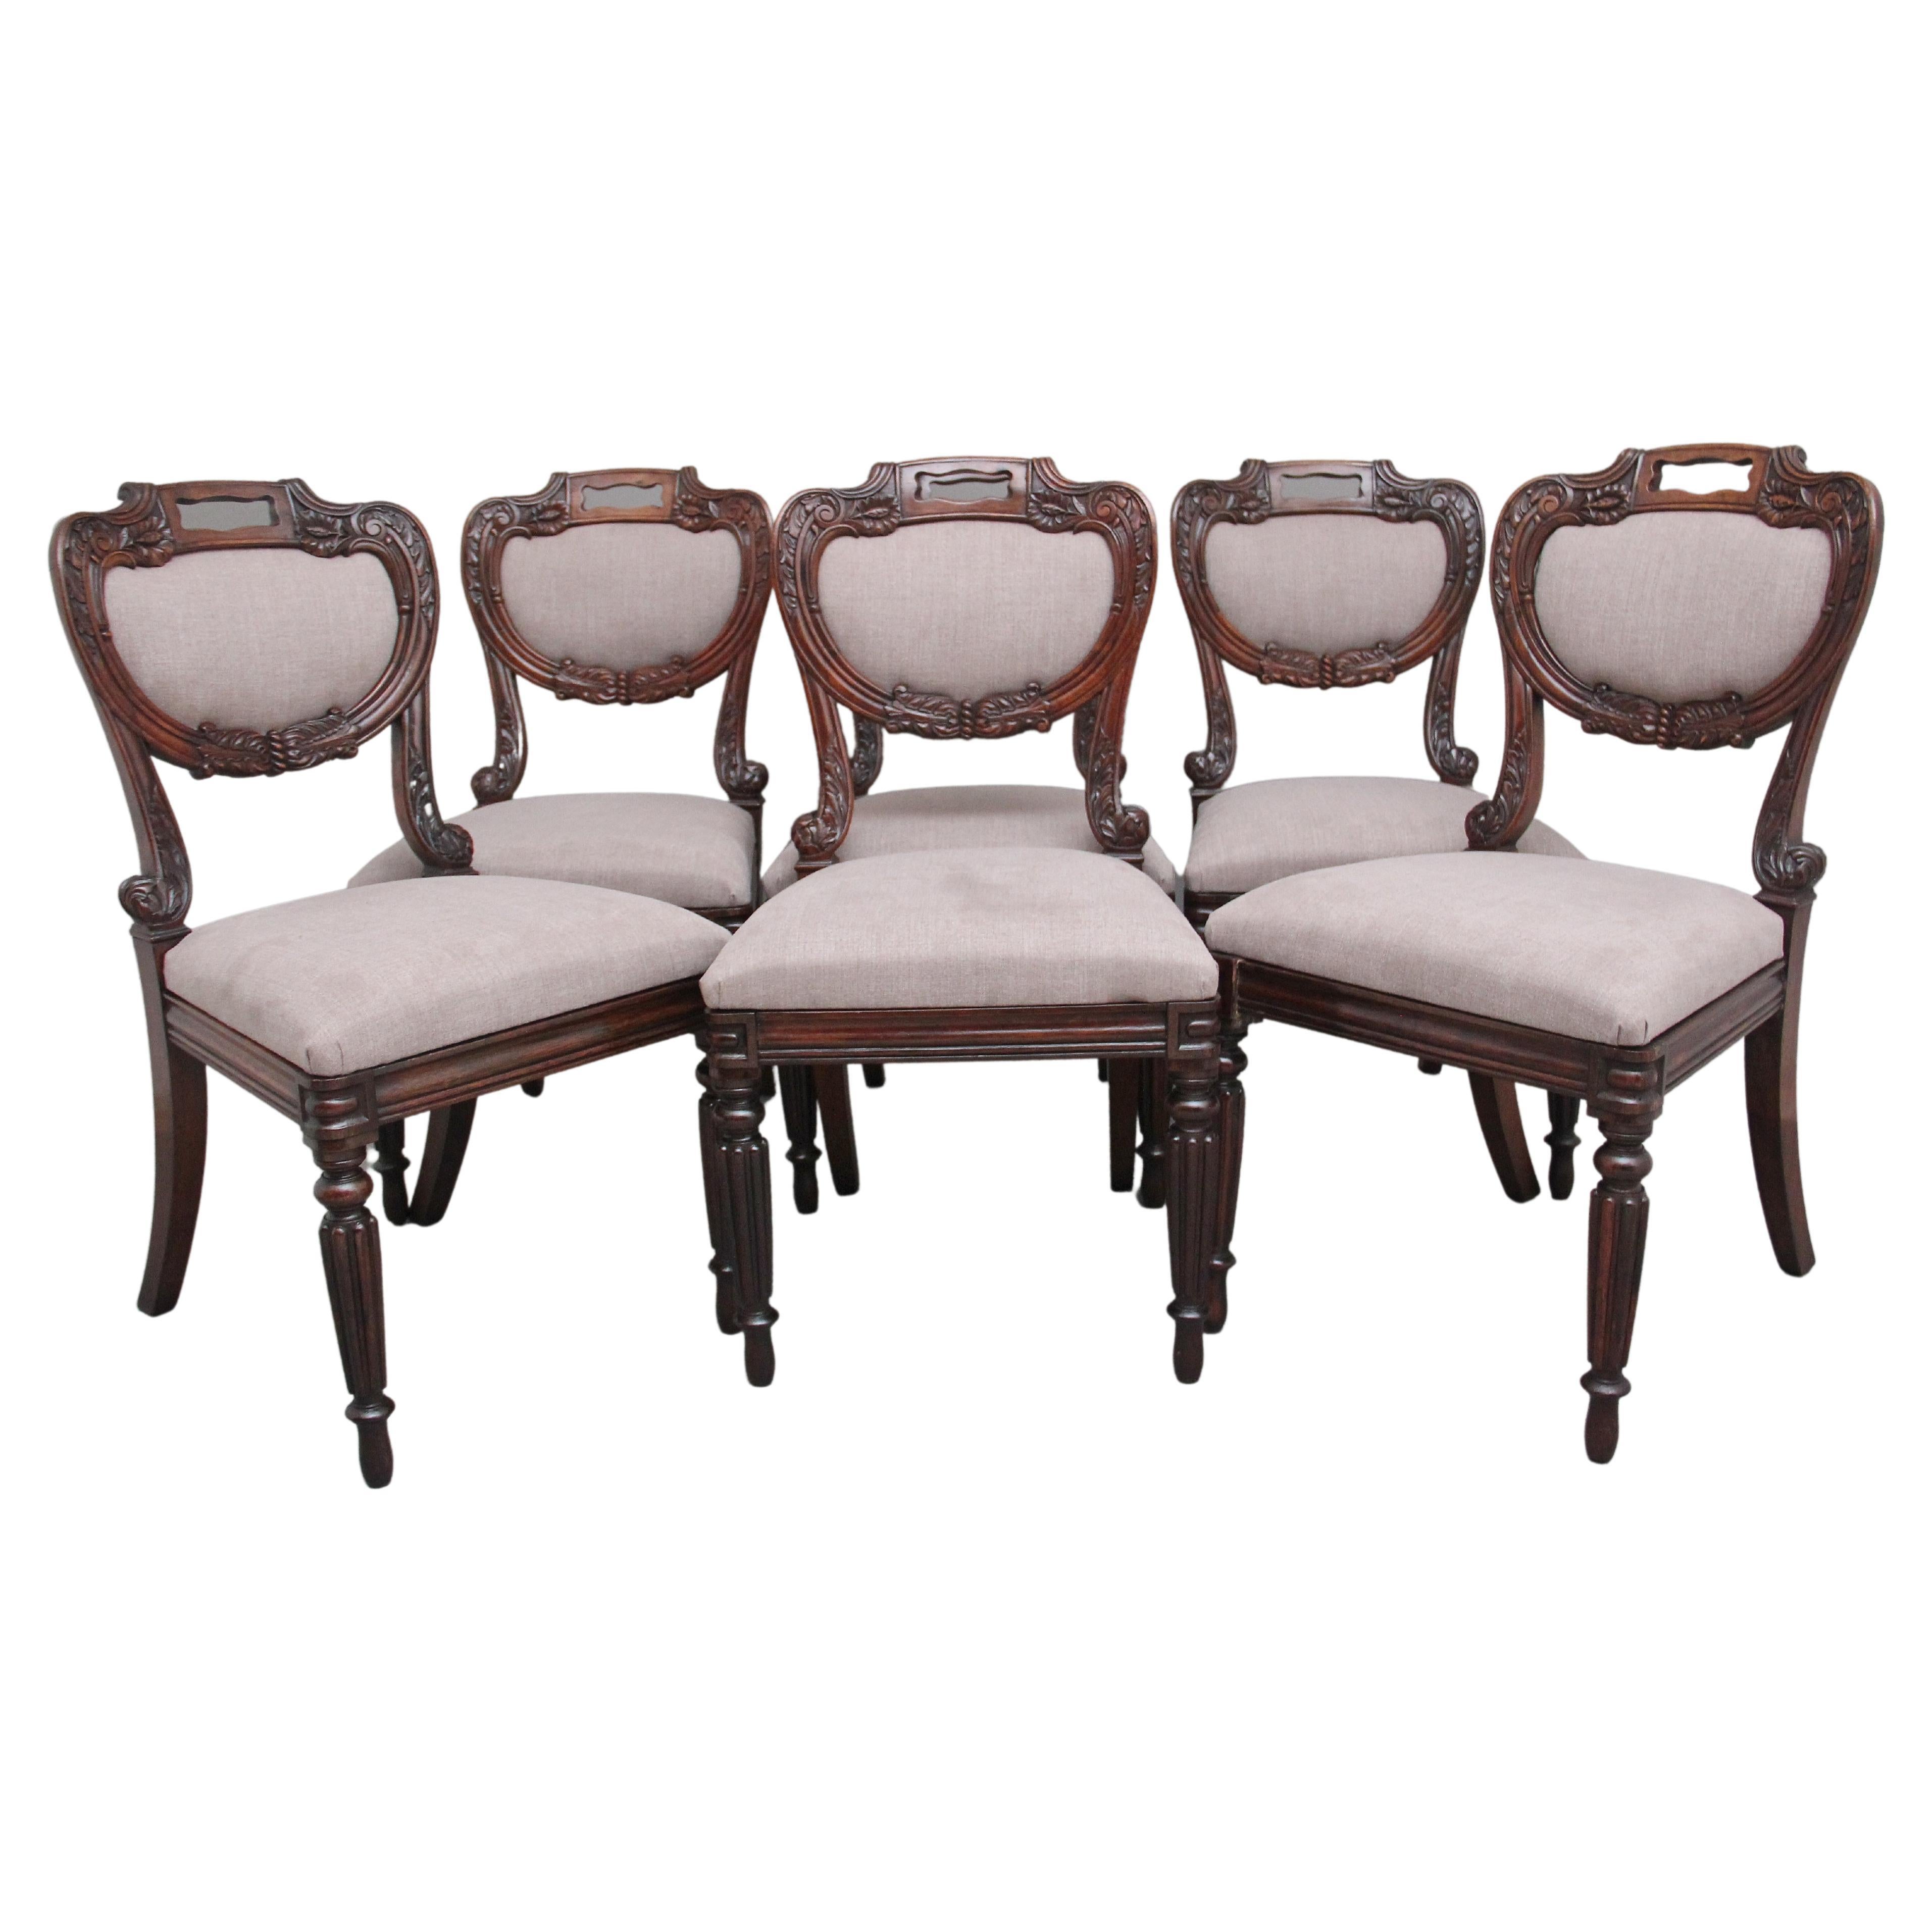 Set of Six Anglo Indian Rosewood Dining Chairs